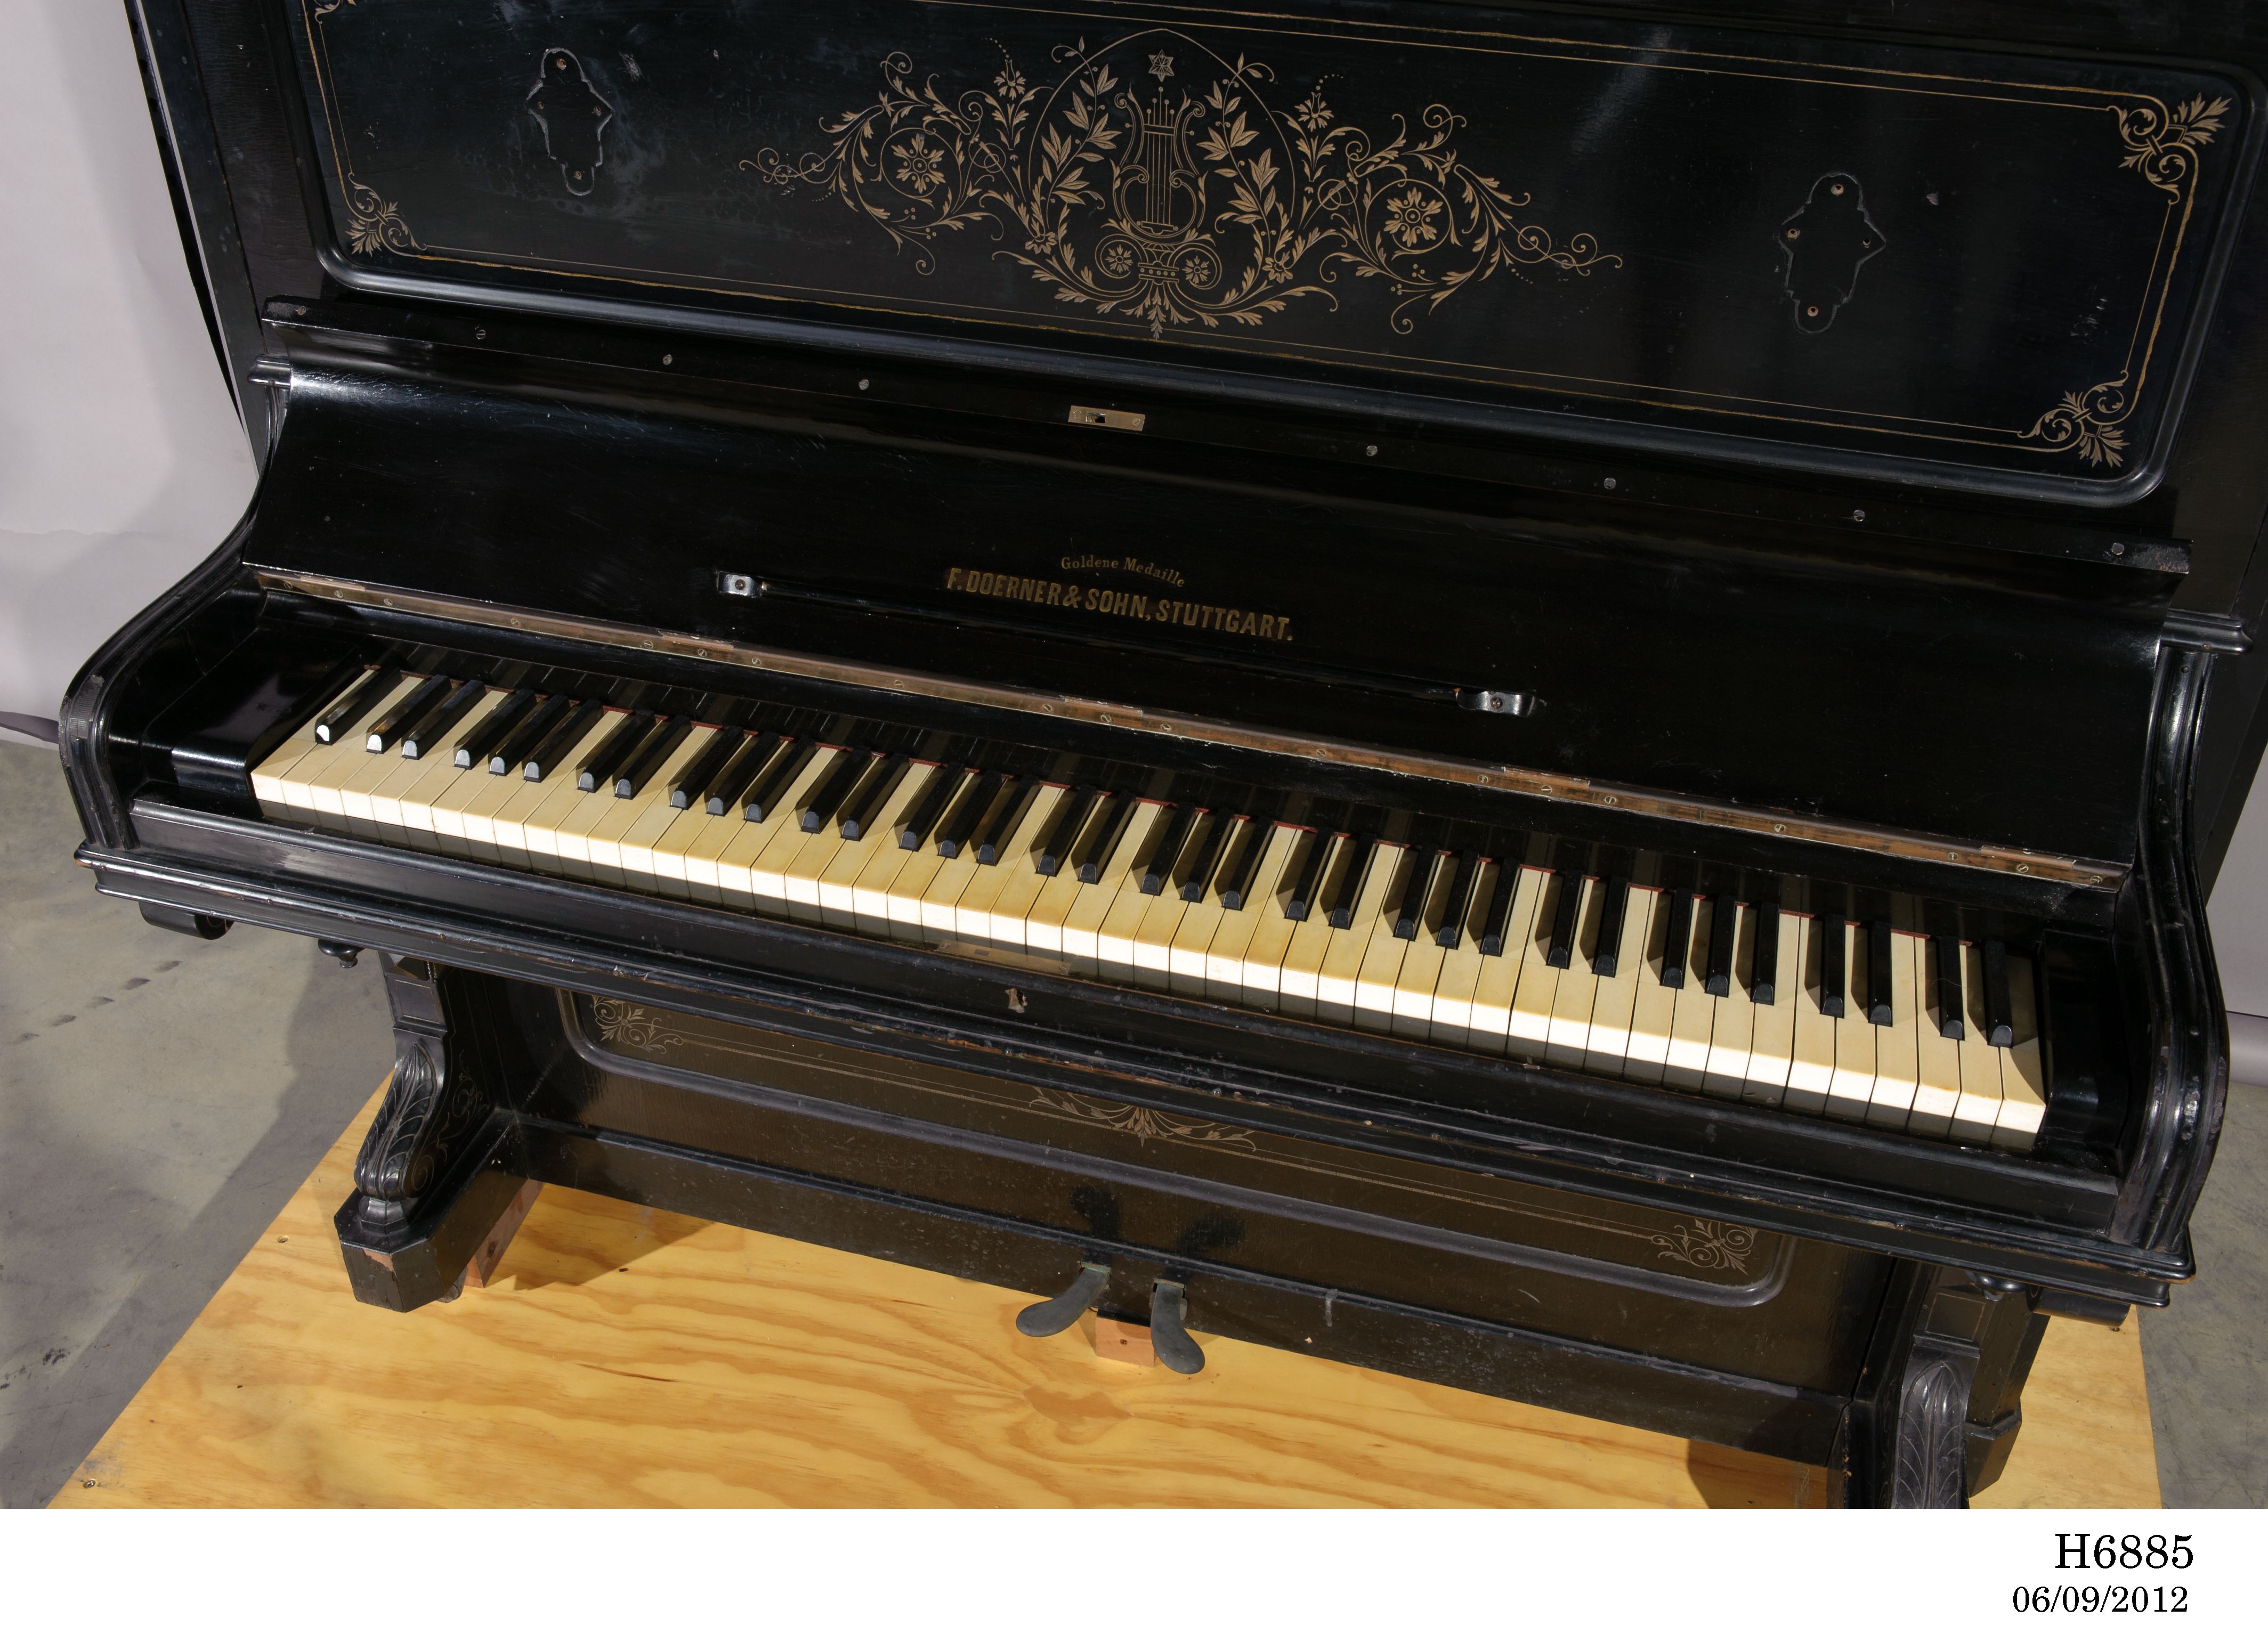 Upright pianoforte made by F Doerner & Sohn - MAAS Collection